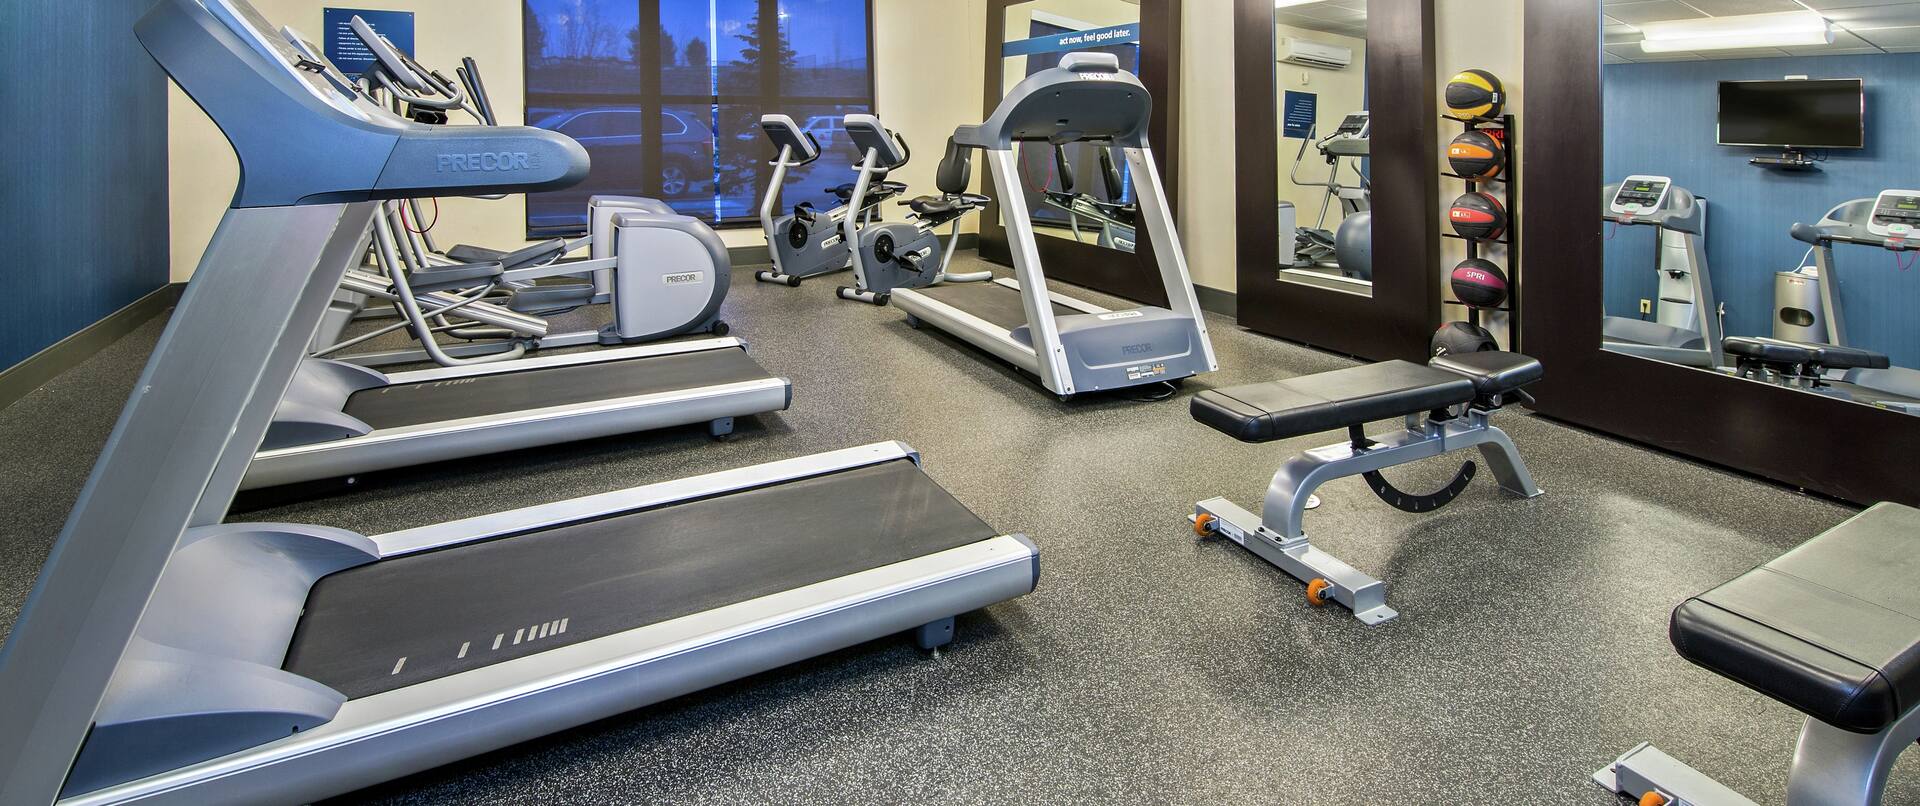 Fitness center with treadmills and recumbent bikes